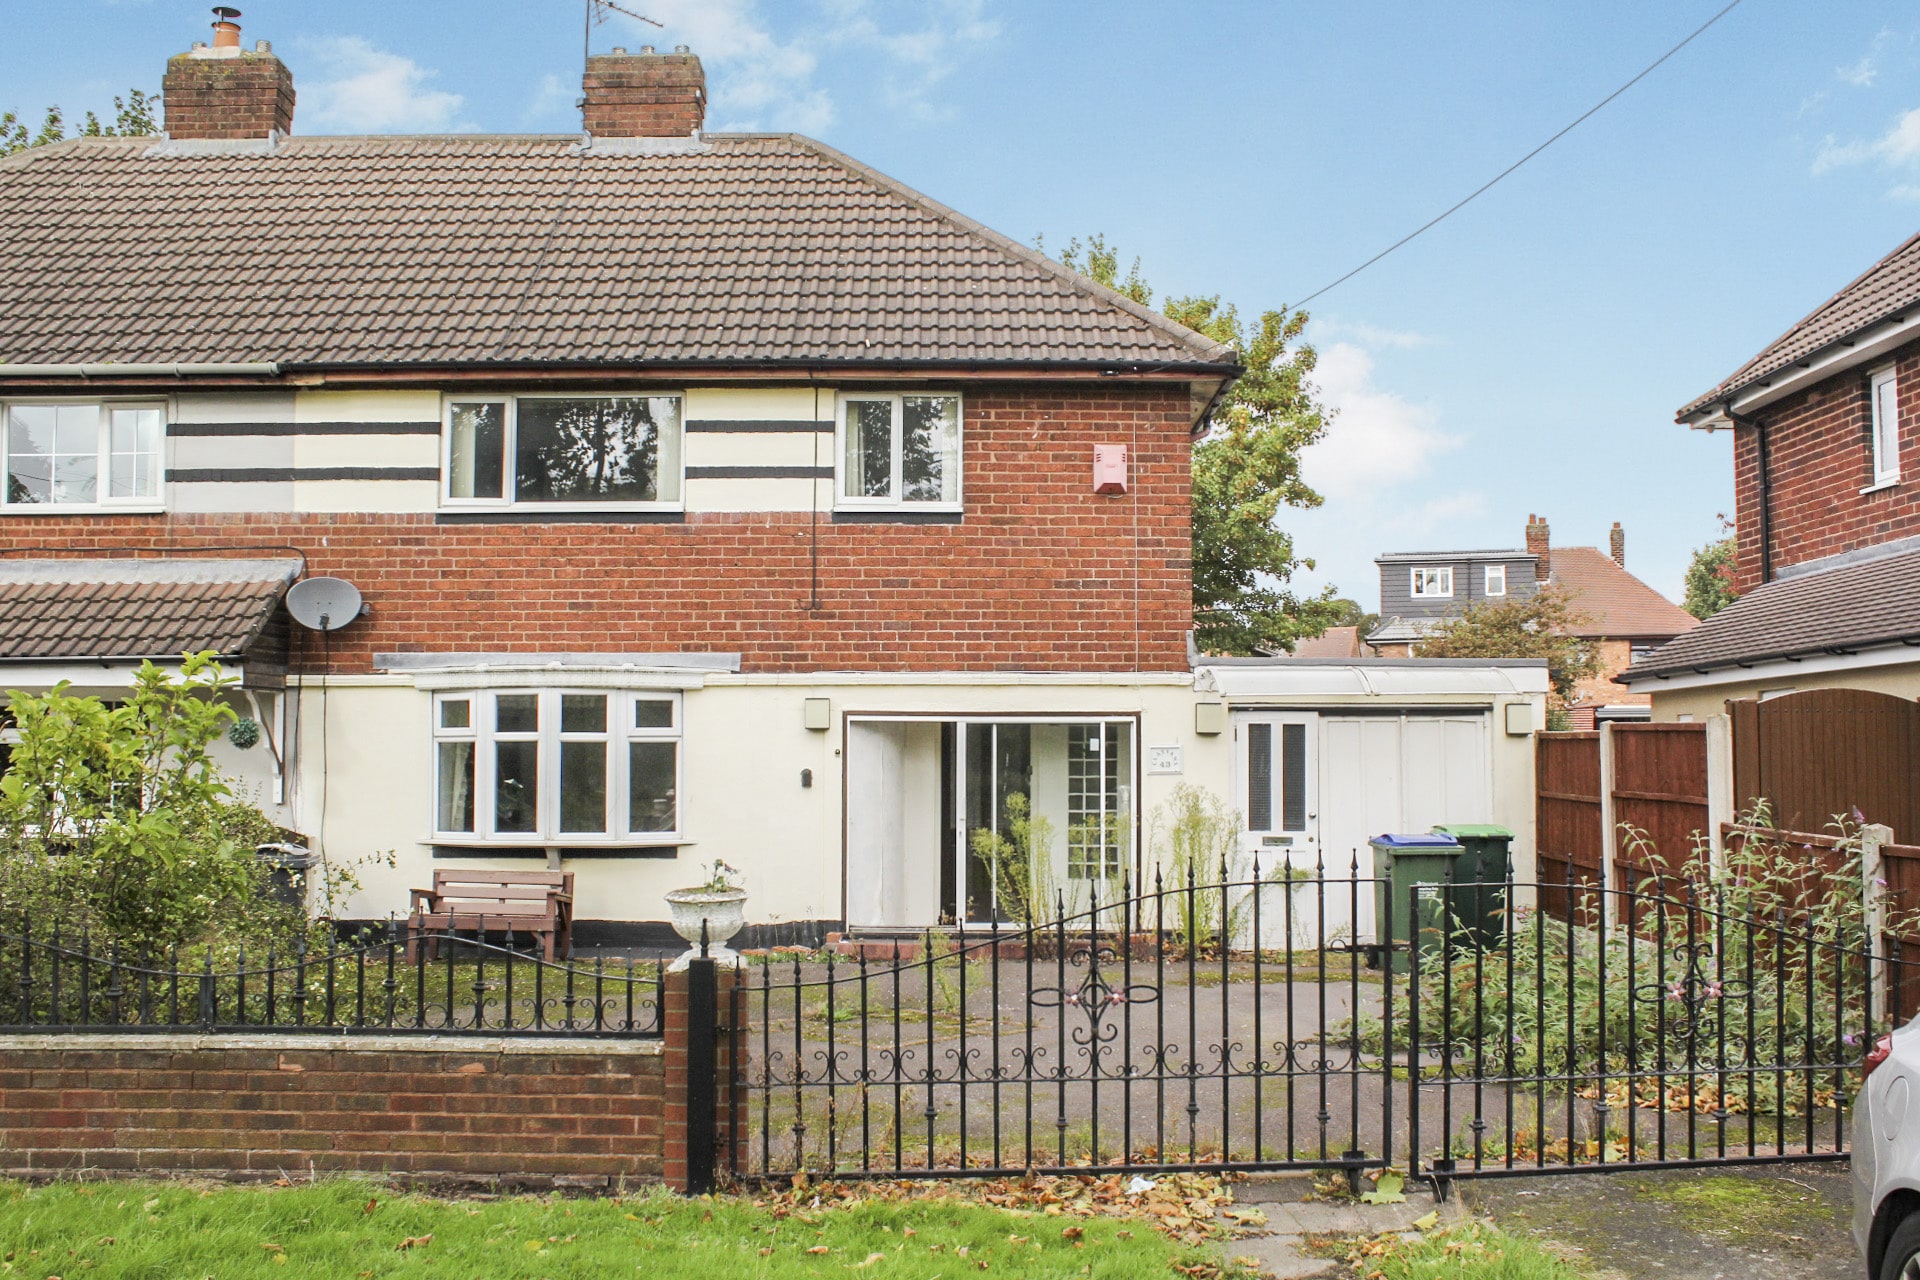 Woden Road South, Wednesbury, WS10